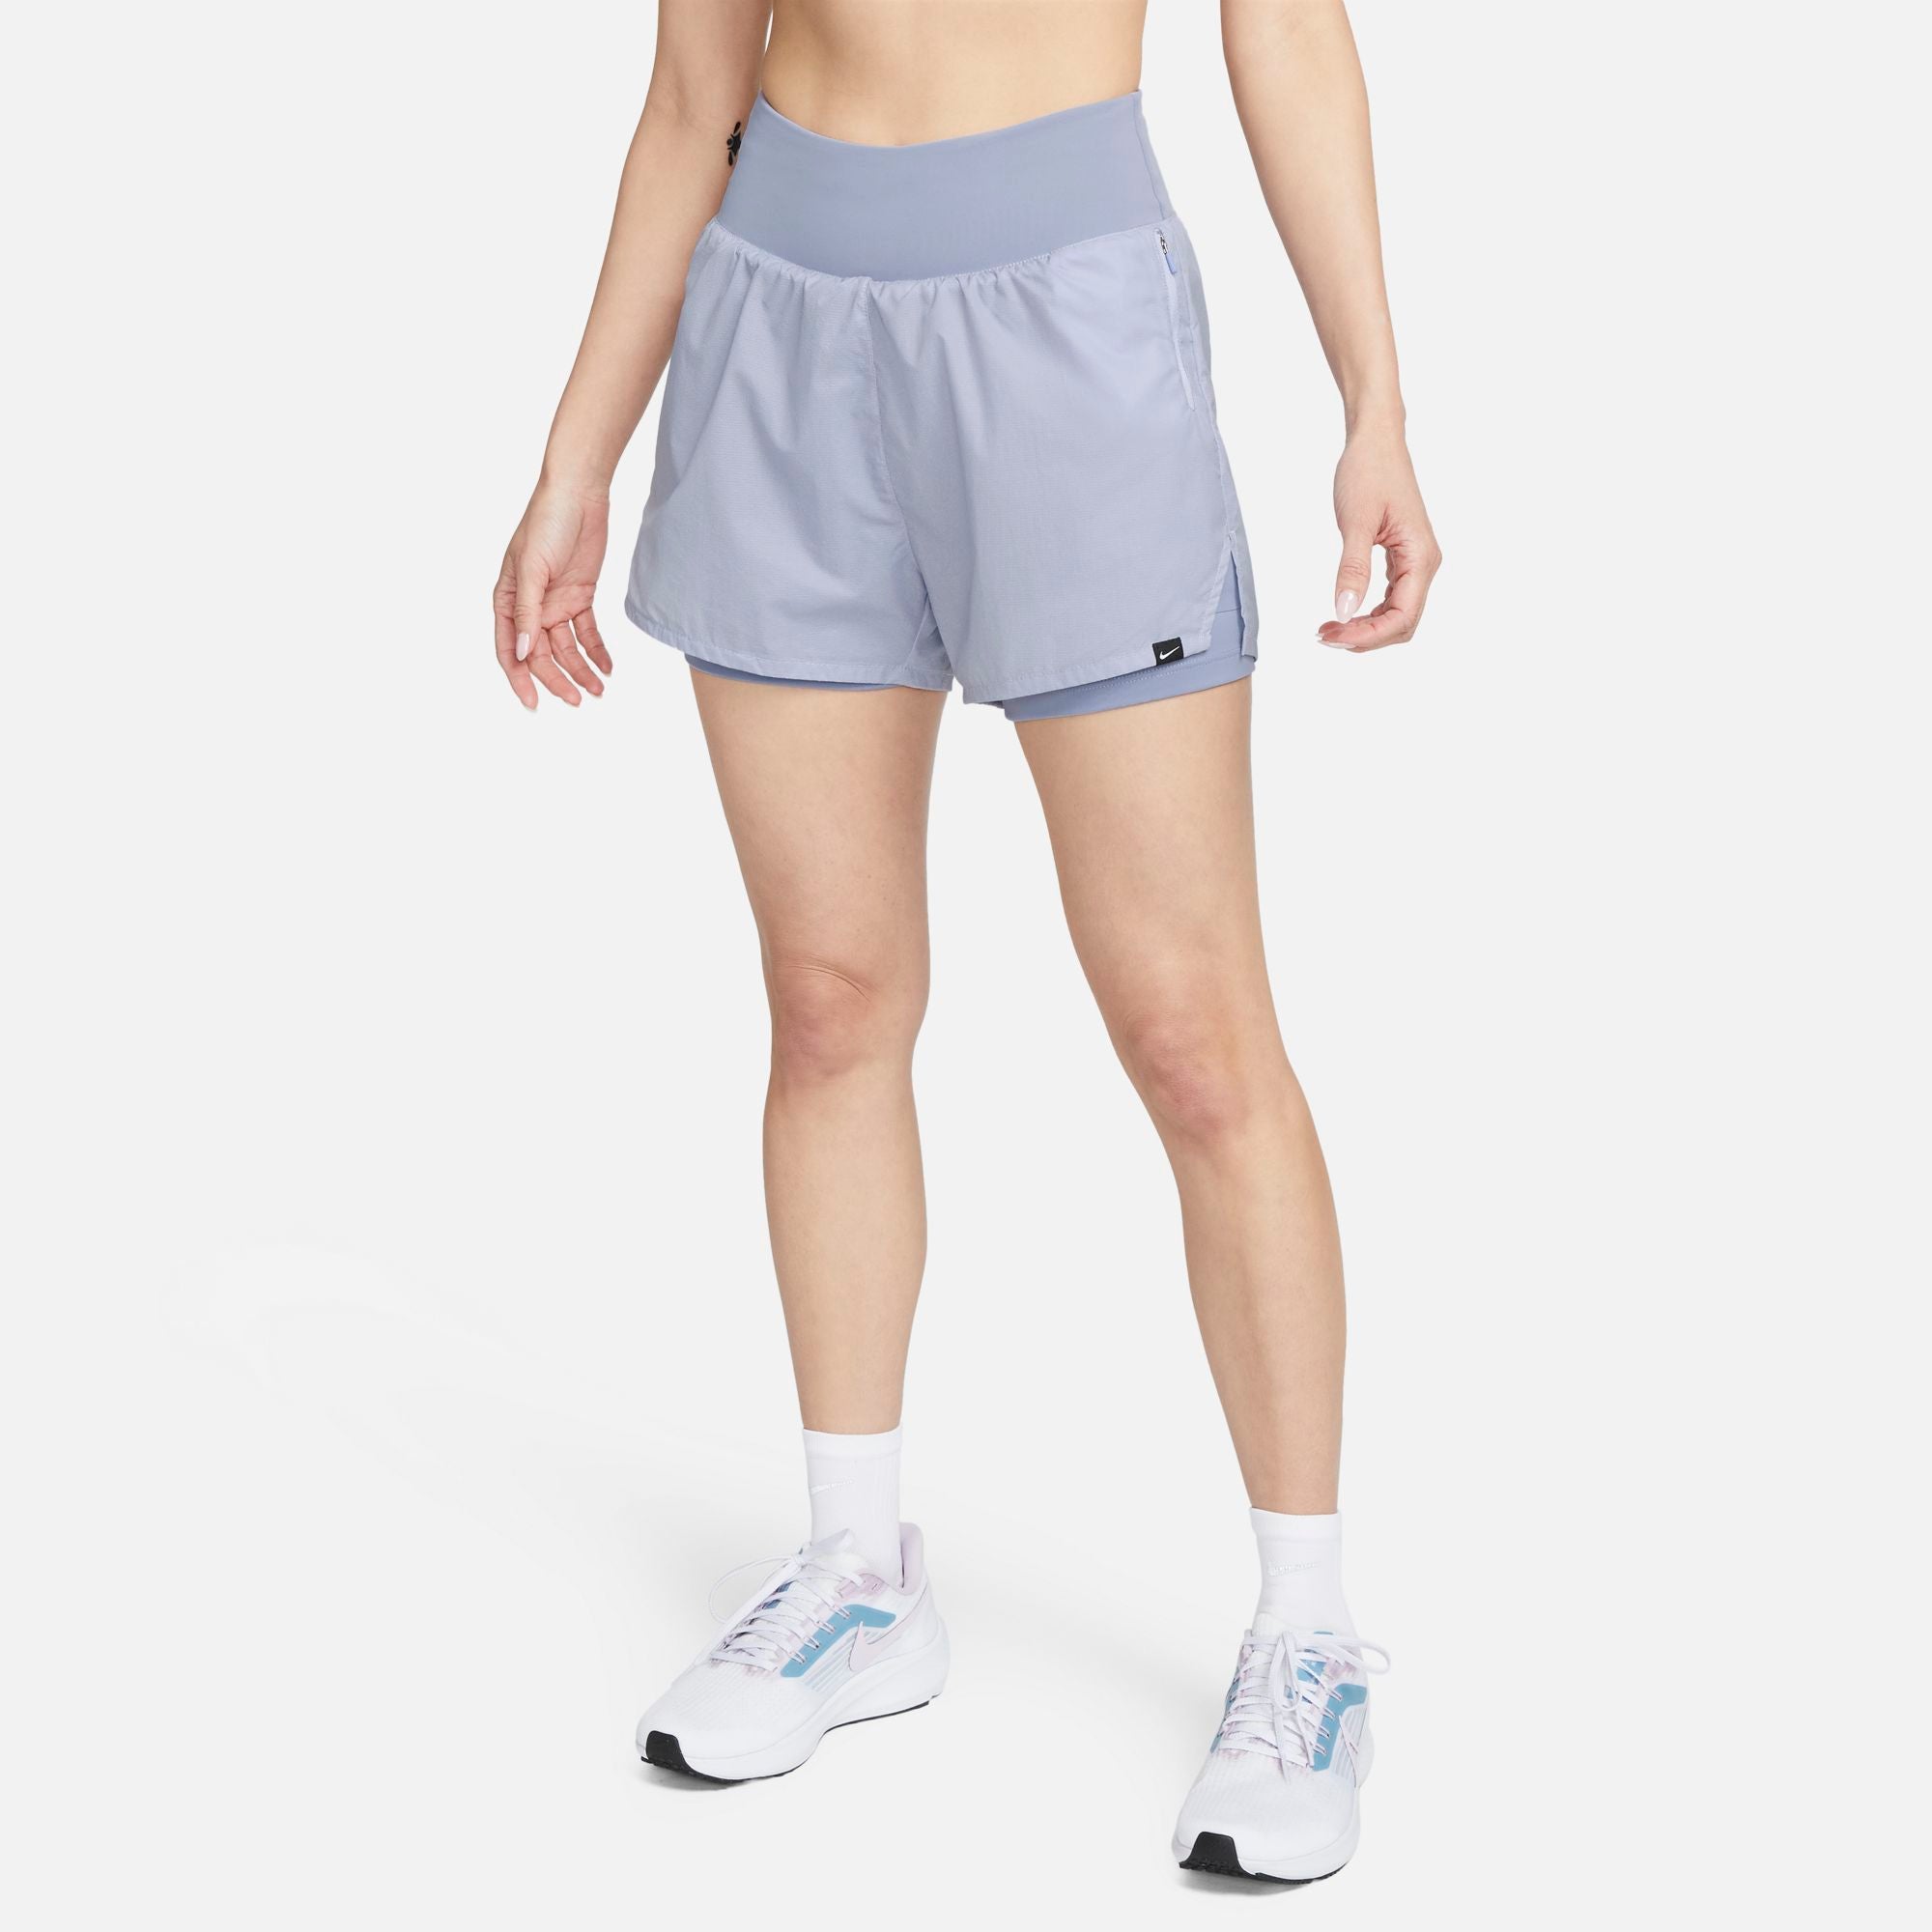 NIKE RUN DIVISION WOMENS MID-RISE 3" 2-IN-1 REFLECTIVE SHORTS